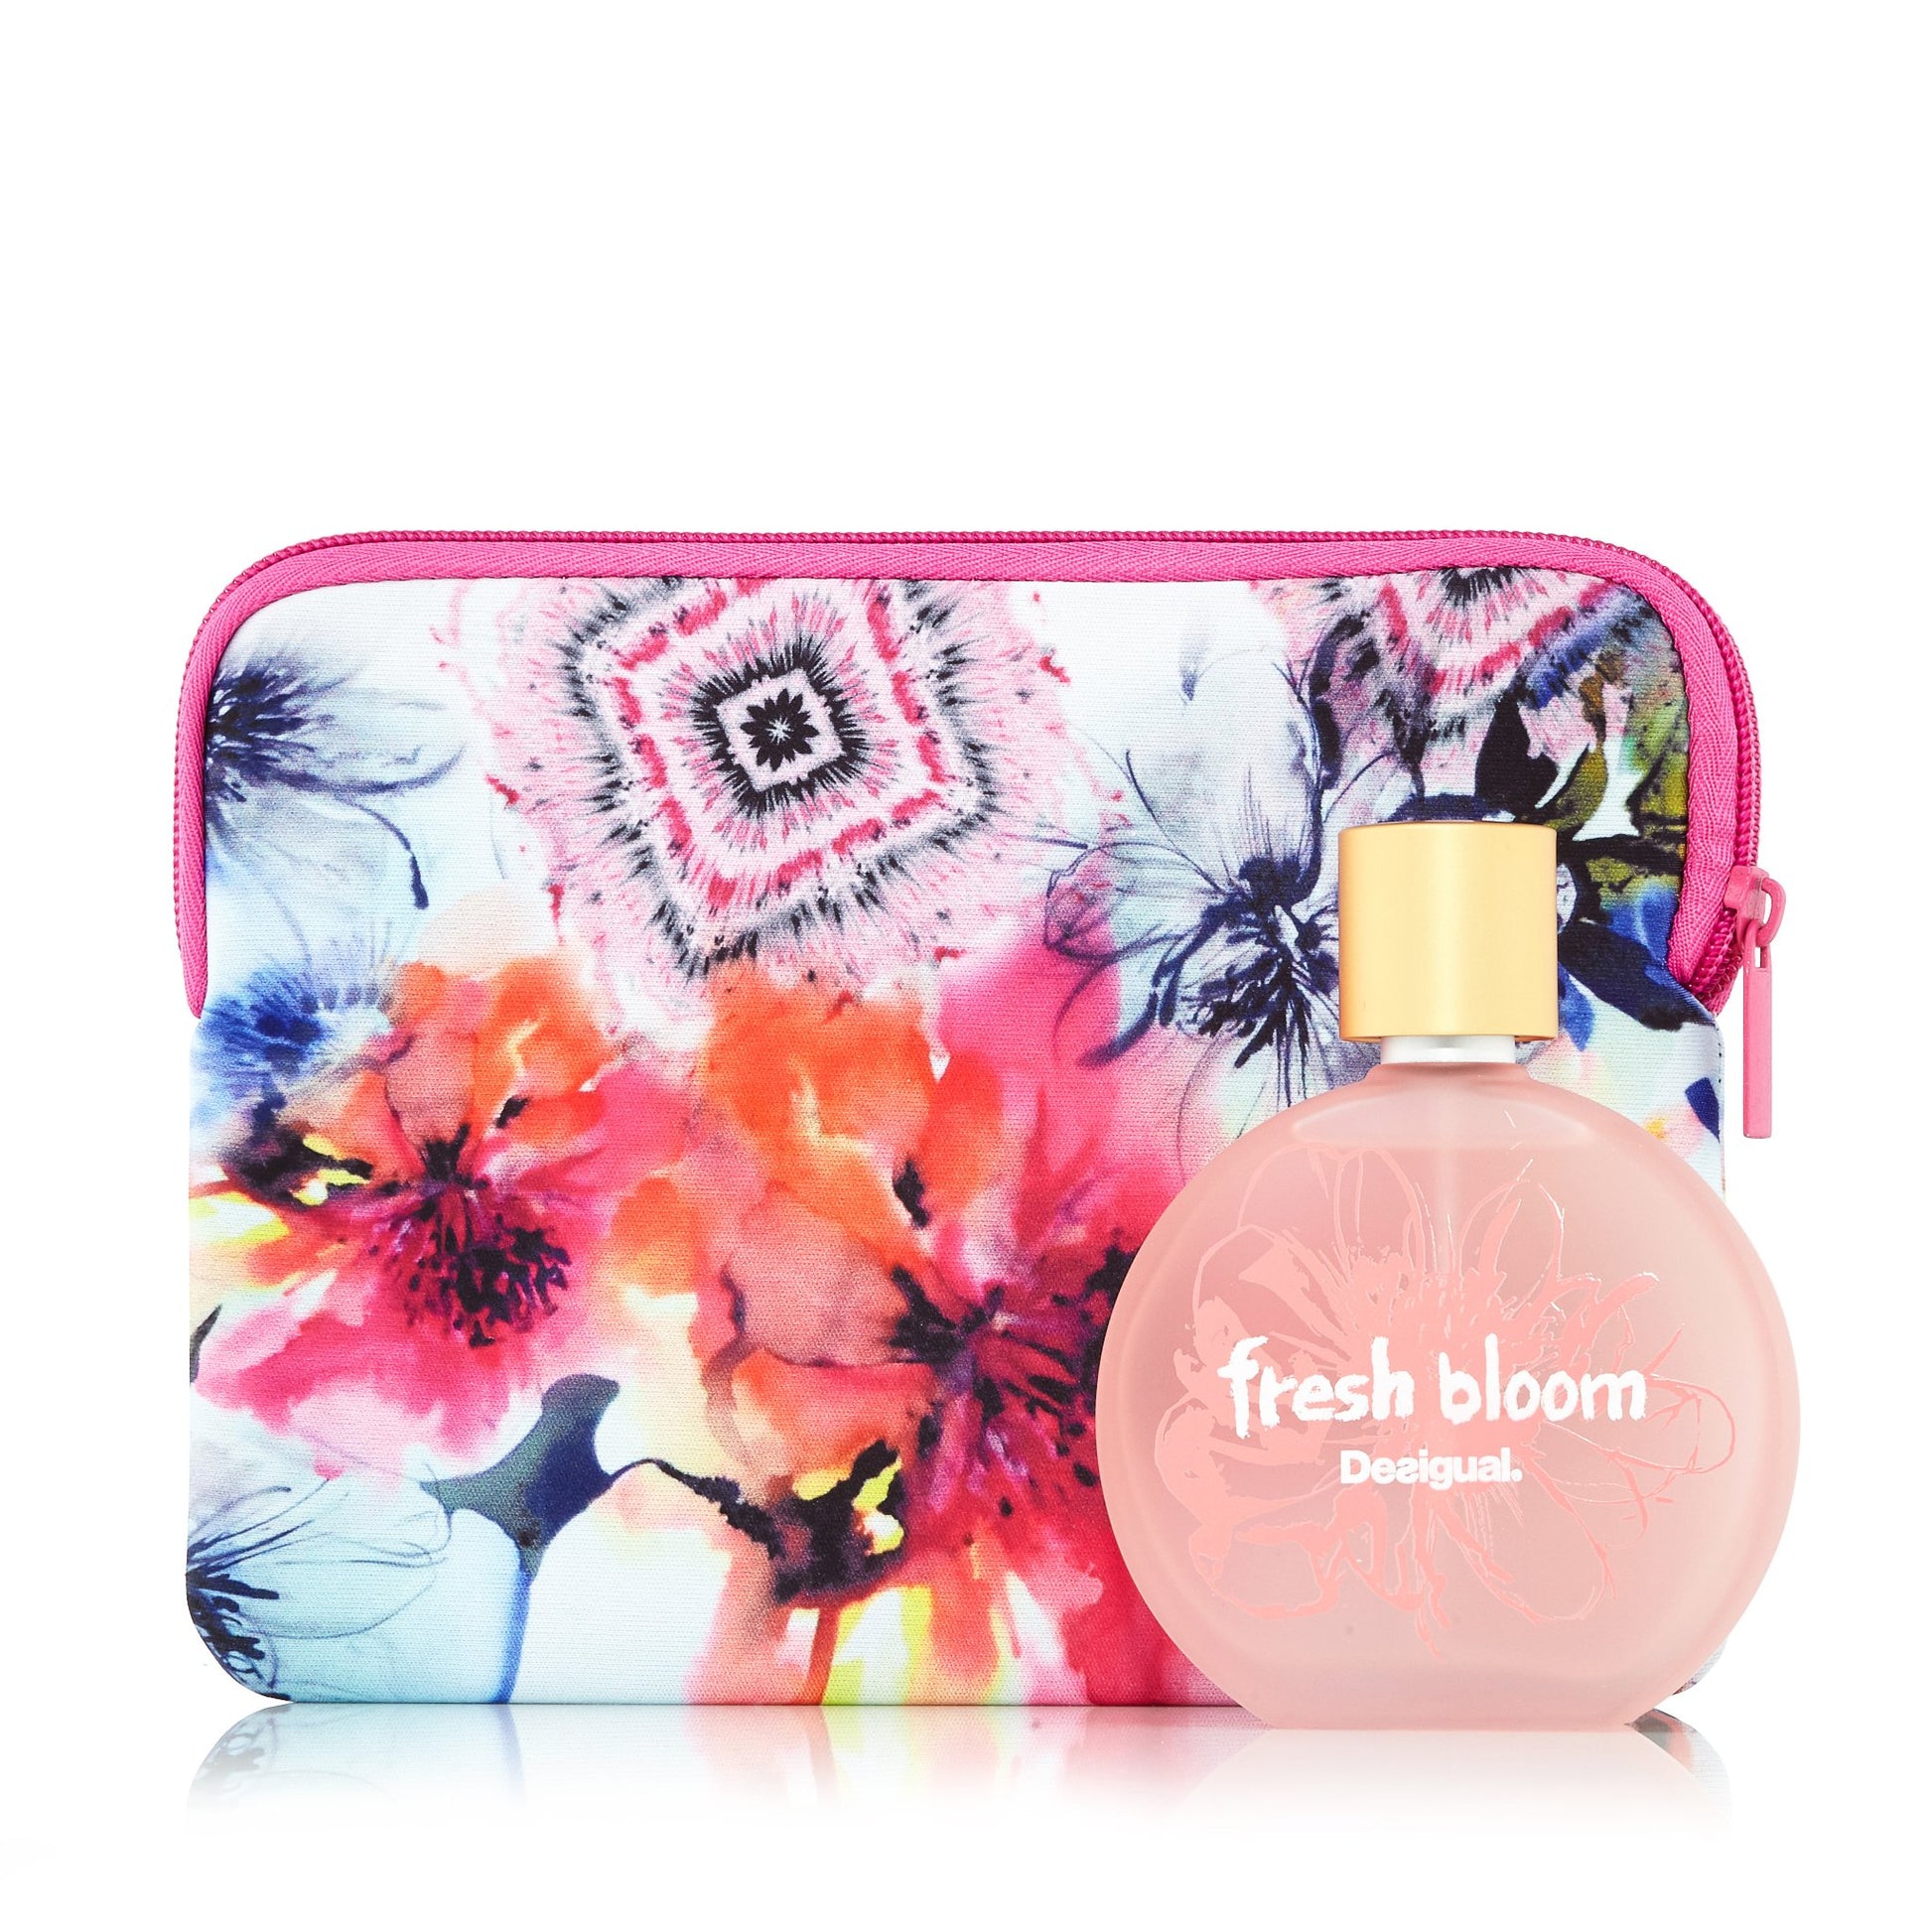 Desigual Fresh Bloom Gift Set for Women 3.4 oz. Click to open in modal